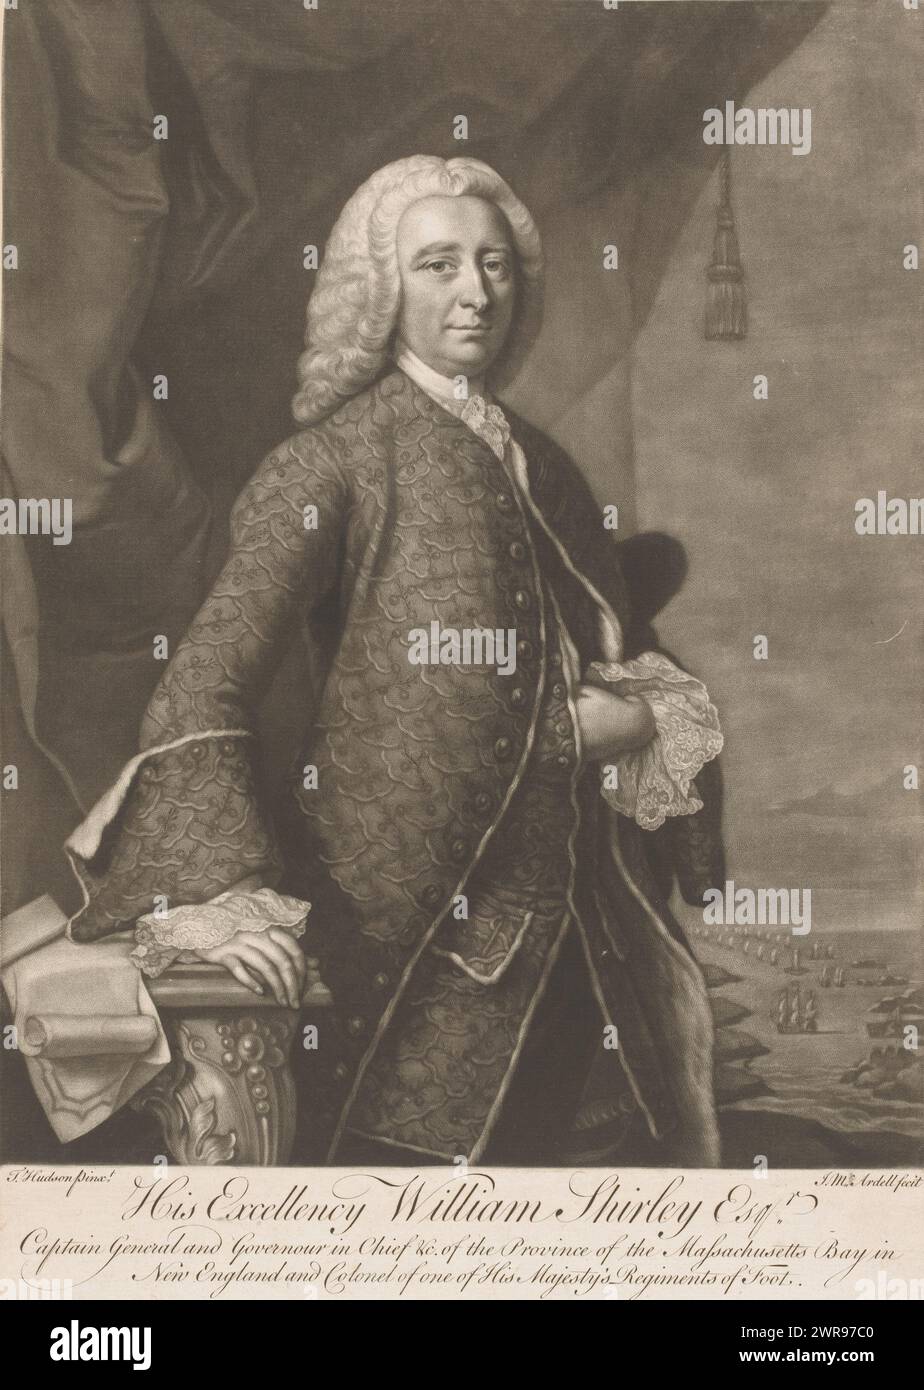 Portrait of William Shirley, His Excellency William Shirley Esqr. (title on object), print maker: James McArdell, after painting by: Thomas Hudson, London, 1755 - 1765, paper, height 350 mm × width 248 mm, print Stock Photo